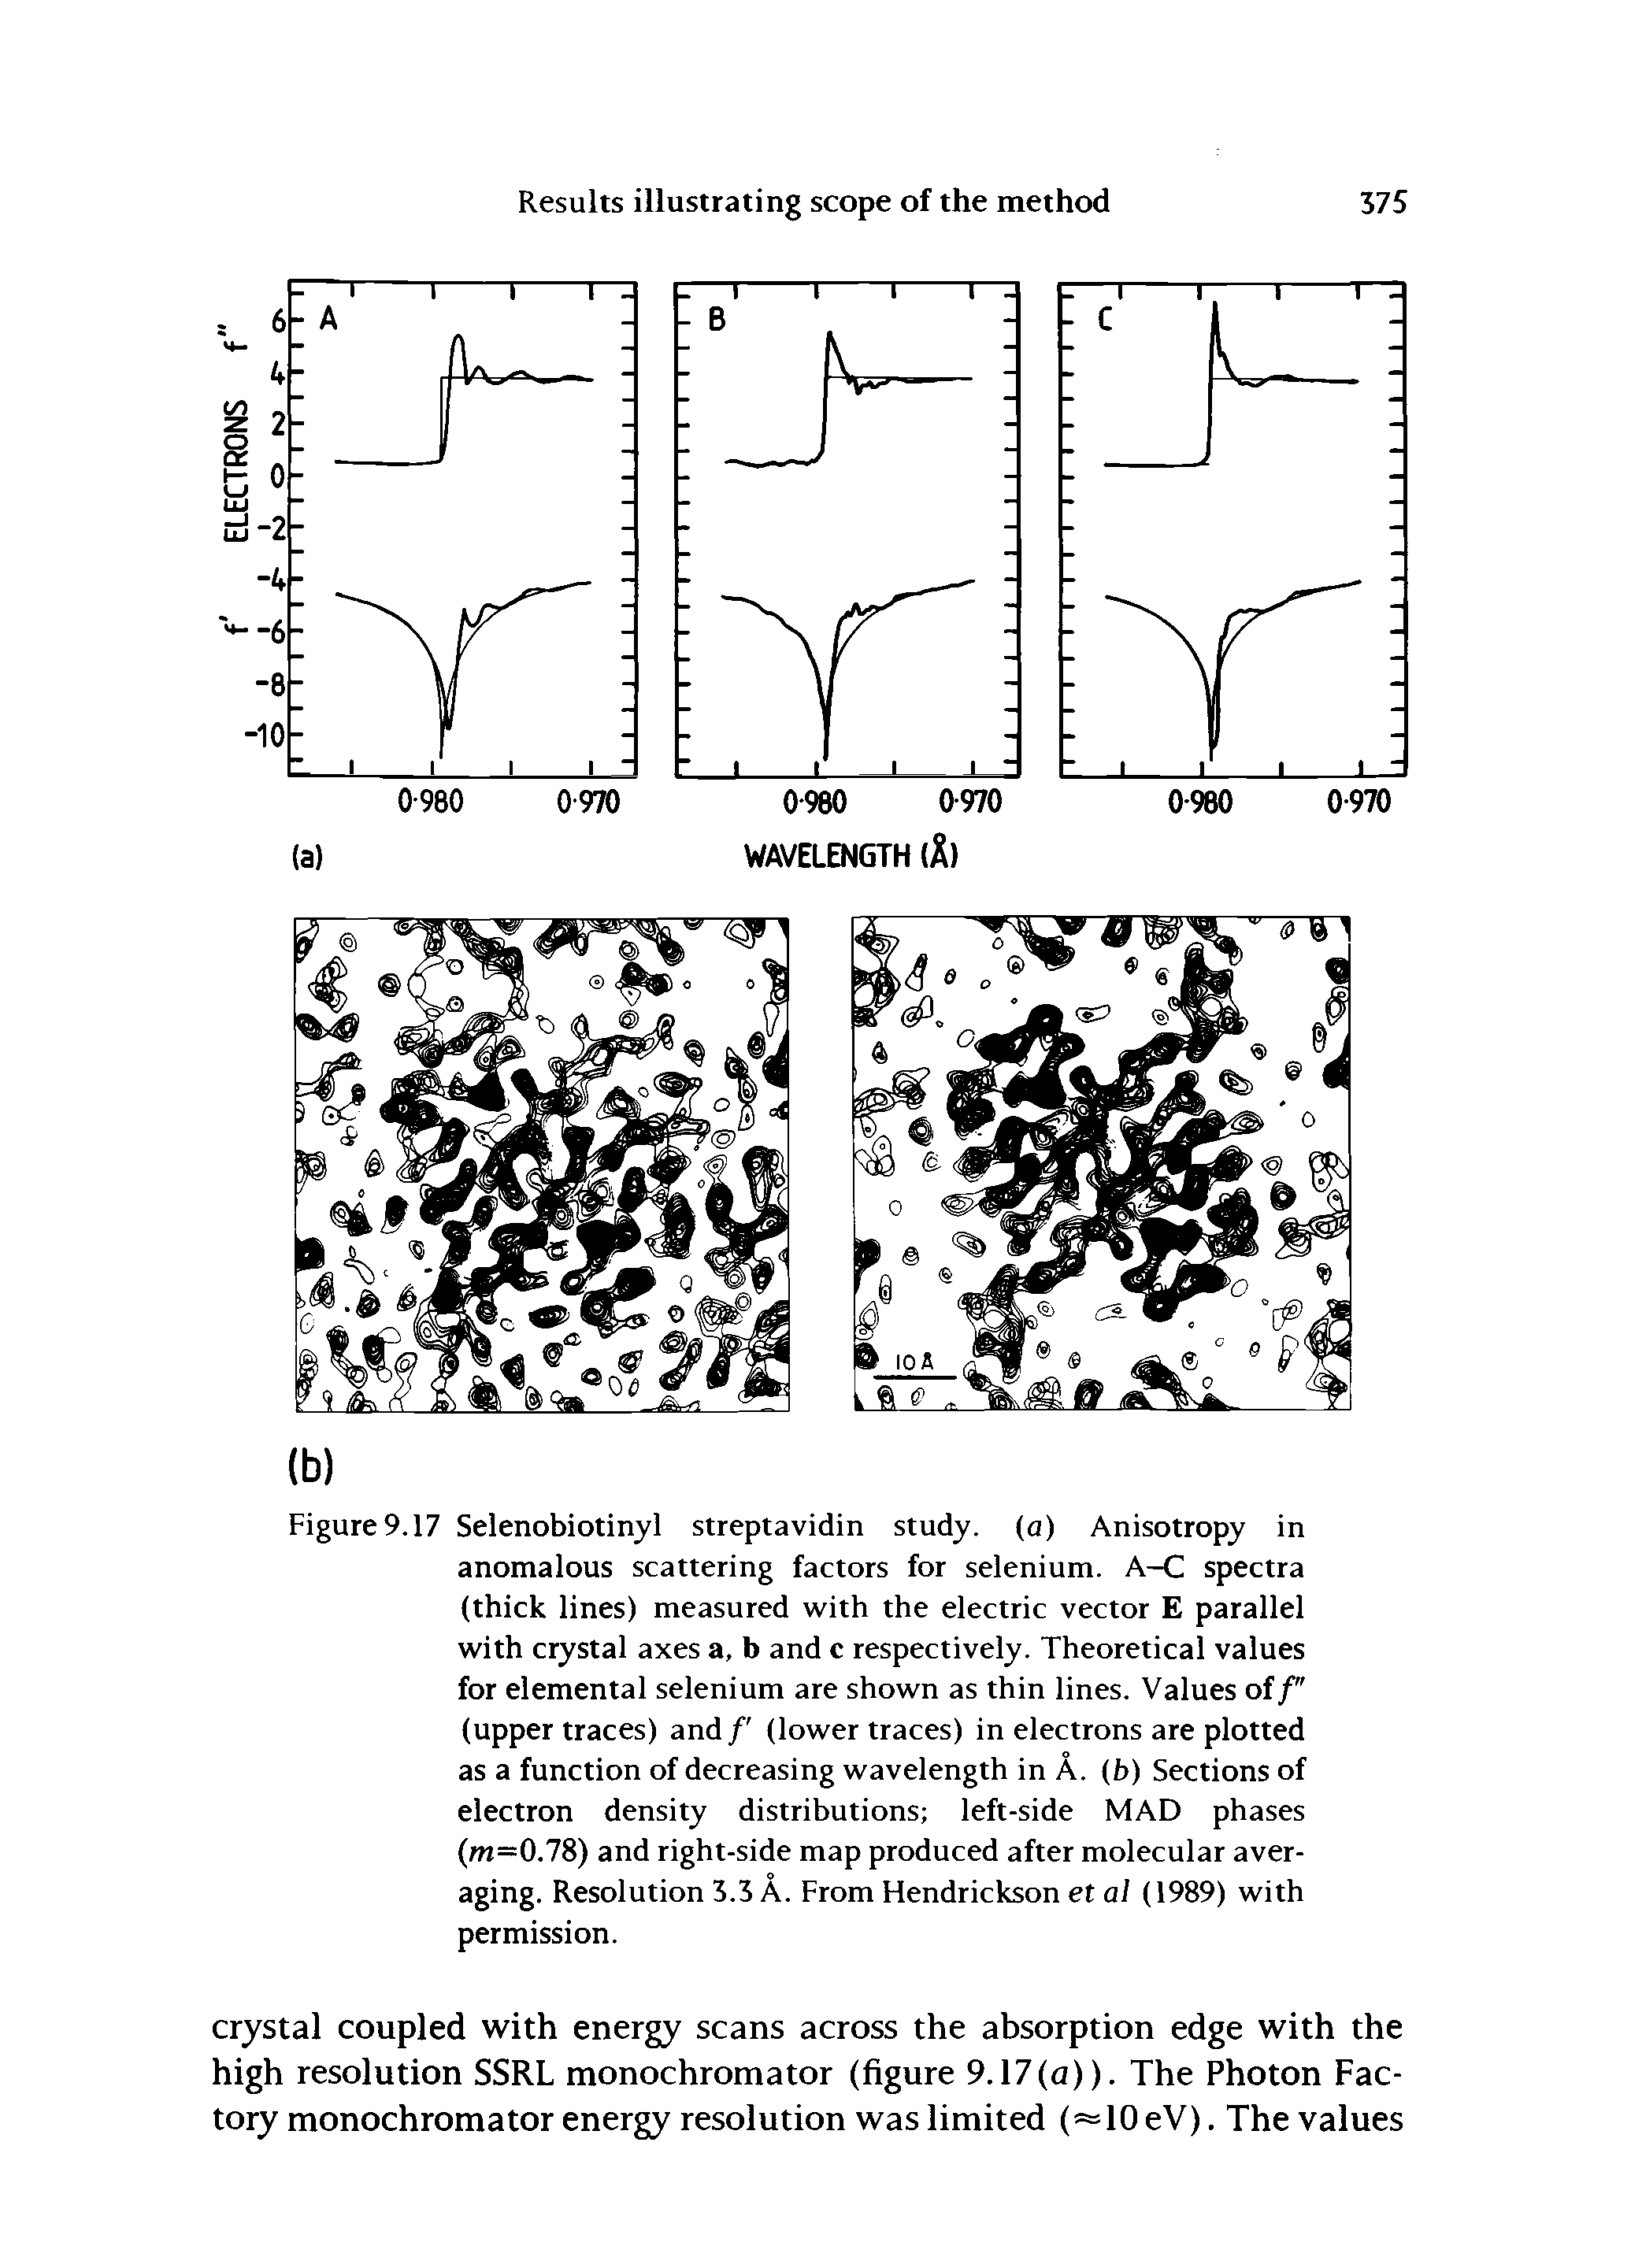 Figure9.17 Selenobiotinyl streptavidin study, (a) Anisotropy in anomalous scattering factors for selenium. A-C spectra (thick lines) measured with the electric vector E parallel with crystal axes a, b and c respectively. Theoretical values for elemental selenium are shown as thin lines. Values off"...